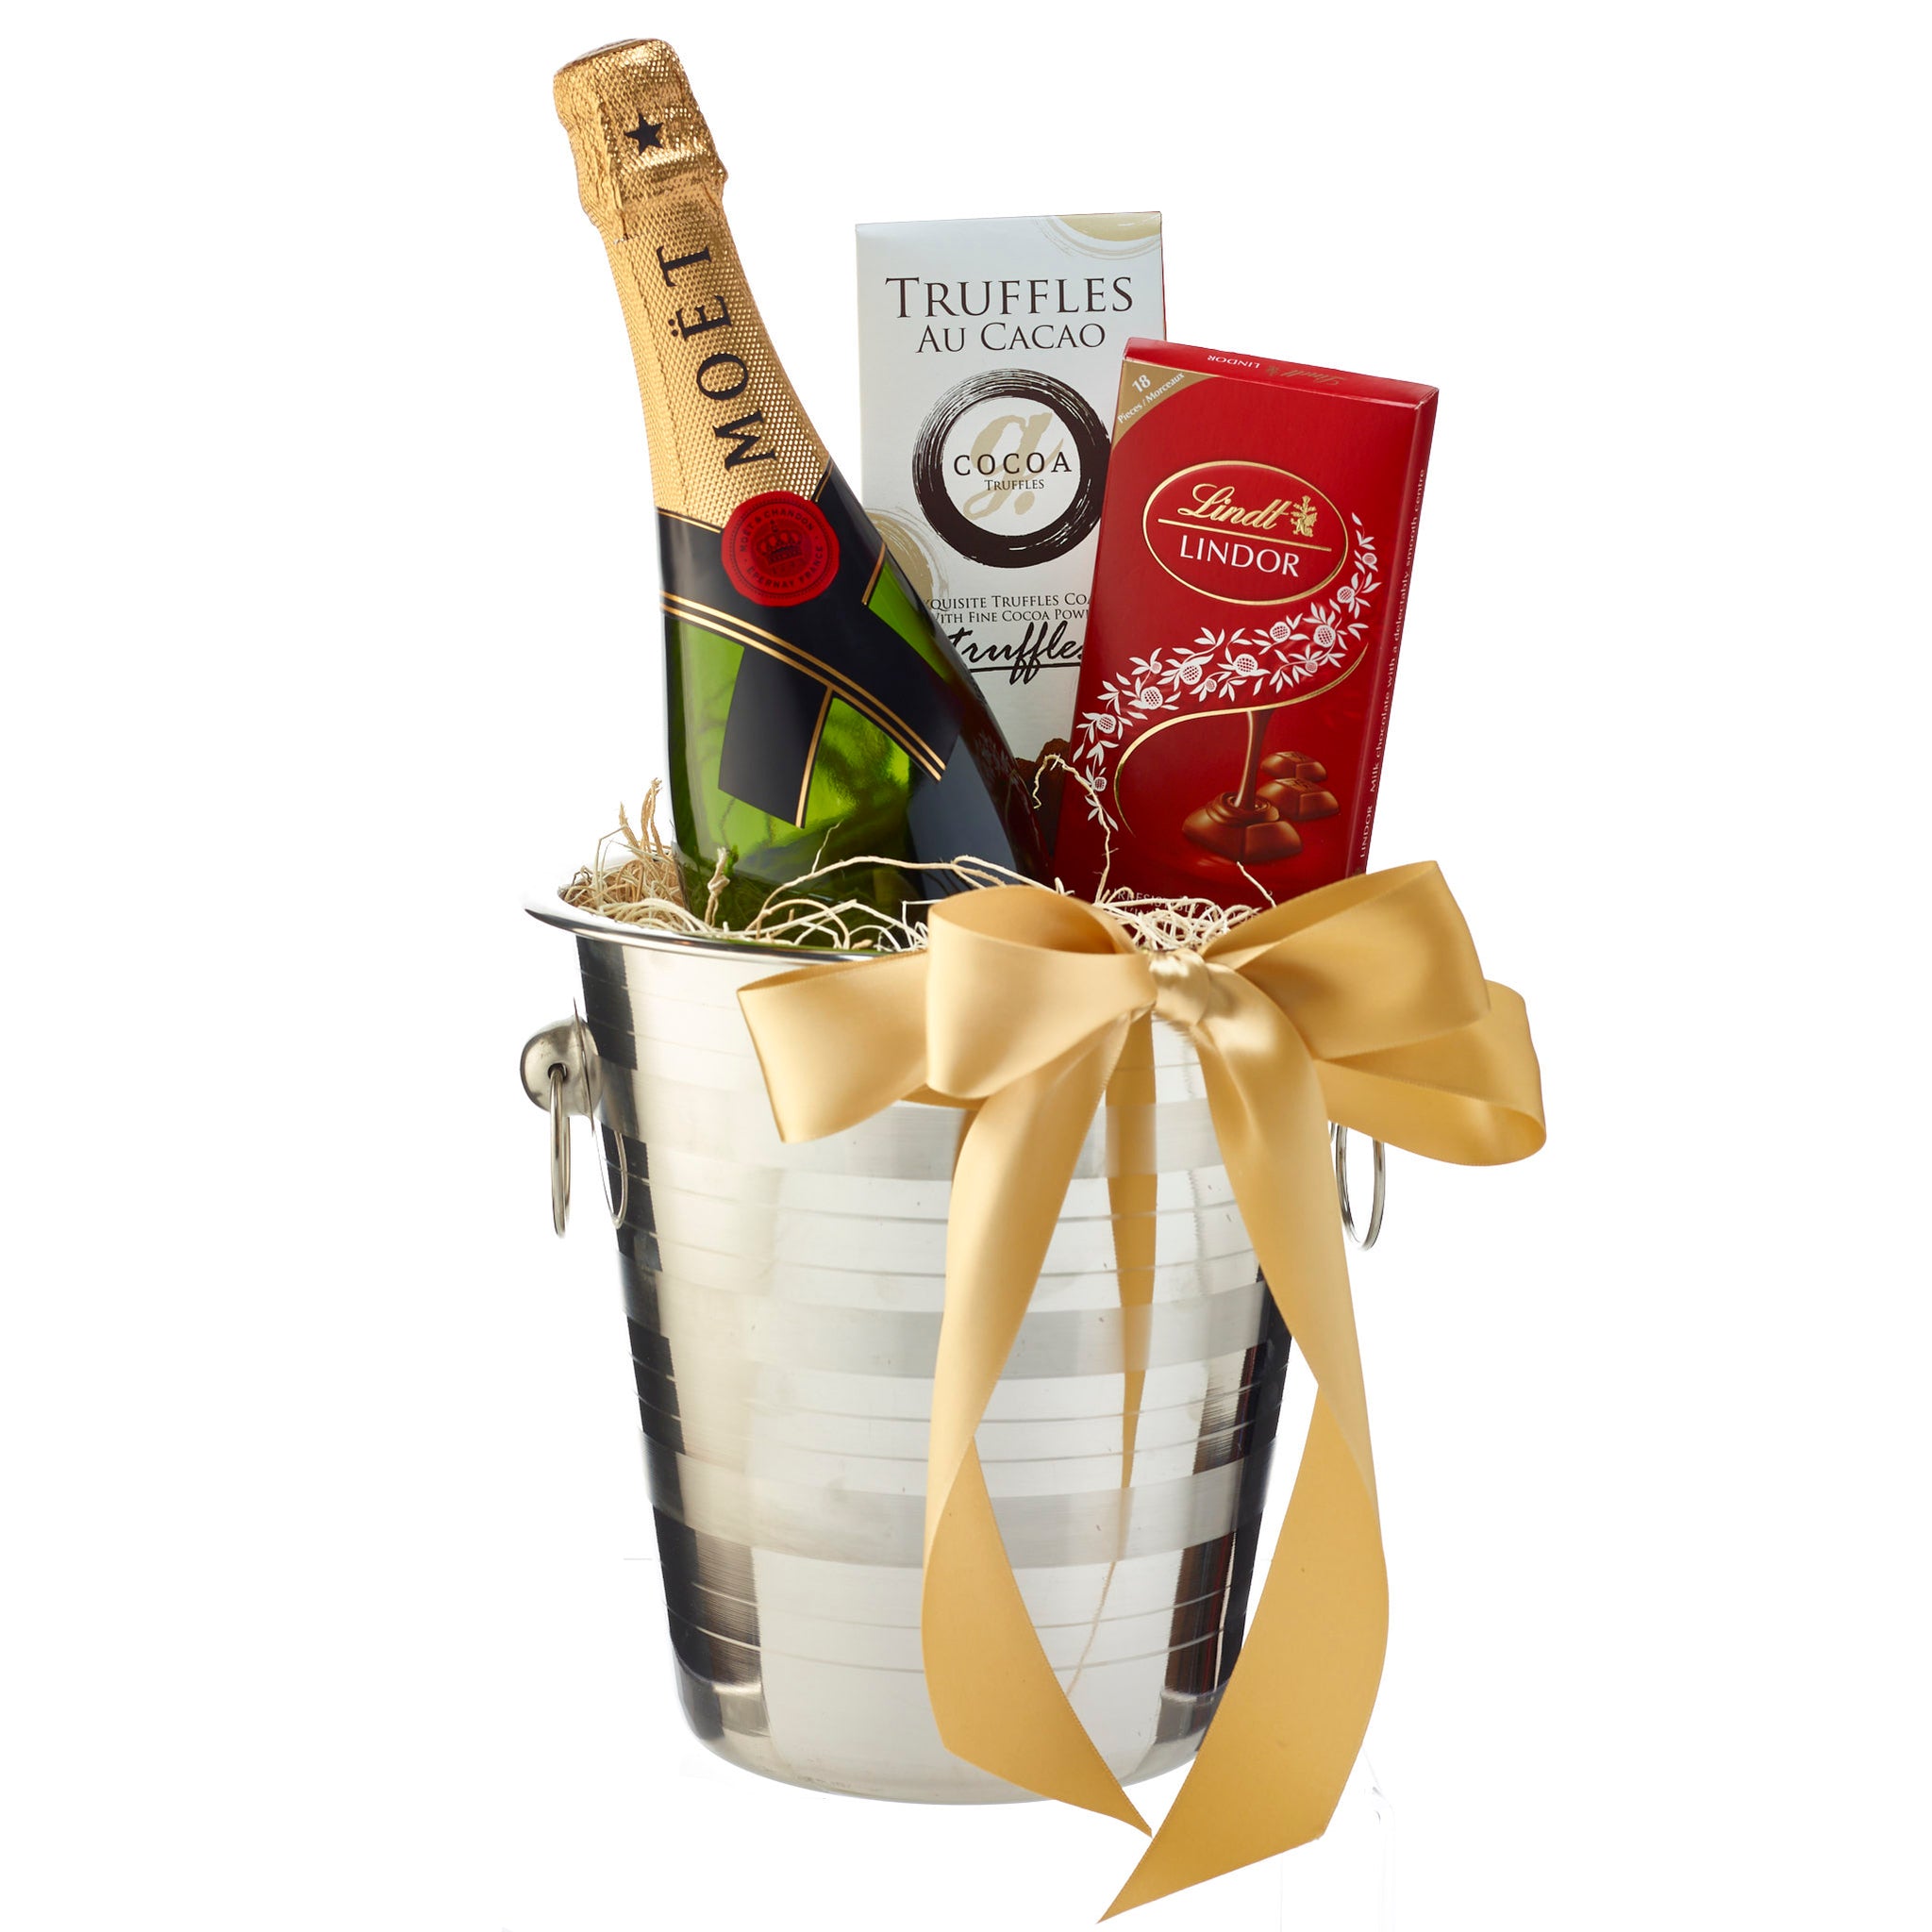 Small gift basket | branded gifts | personalized |wedding gift | marketing  items | housewarming gifts| new home gift | shower gift | realtor closing  gifts | gifts for couple | gift |